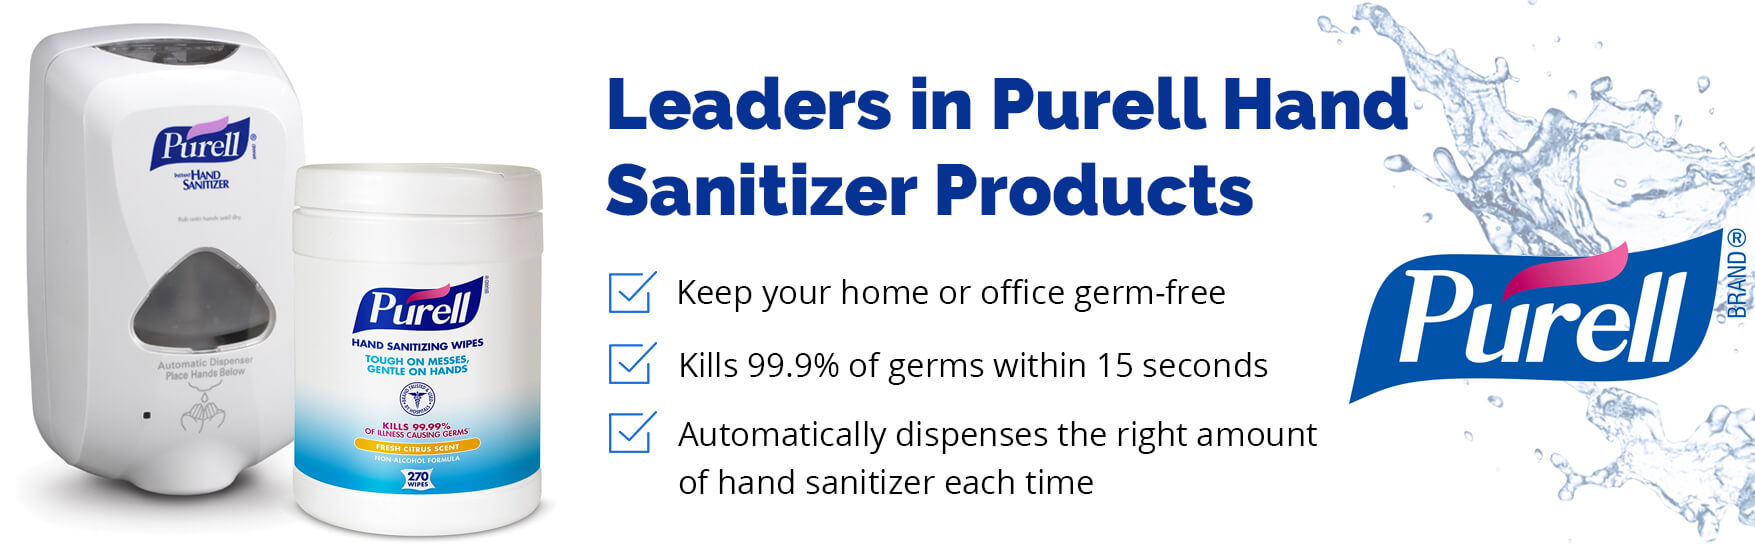 Leaders in purell hand santizer products